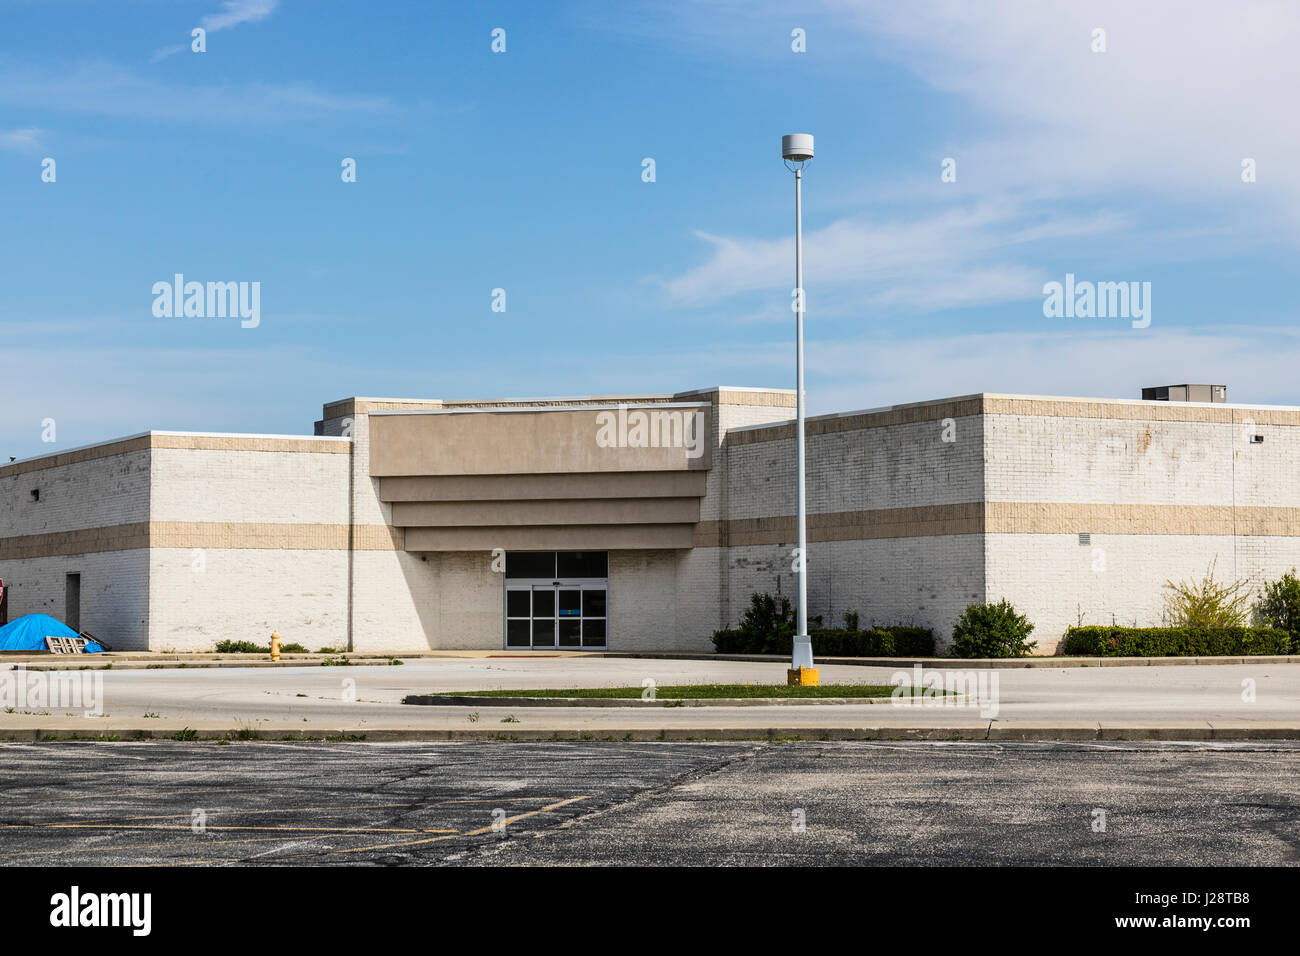 Marion - Circa April 2017: Recently shuttered Sears Retail Mall Location. According to a regulatory filing, Sears Holdings Corp. lost more than $2 bil Stock Photo